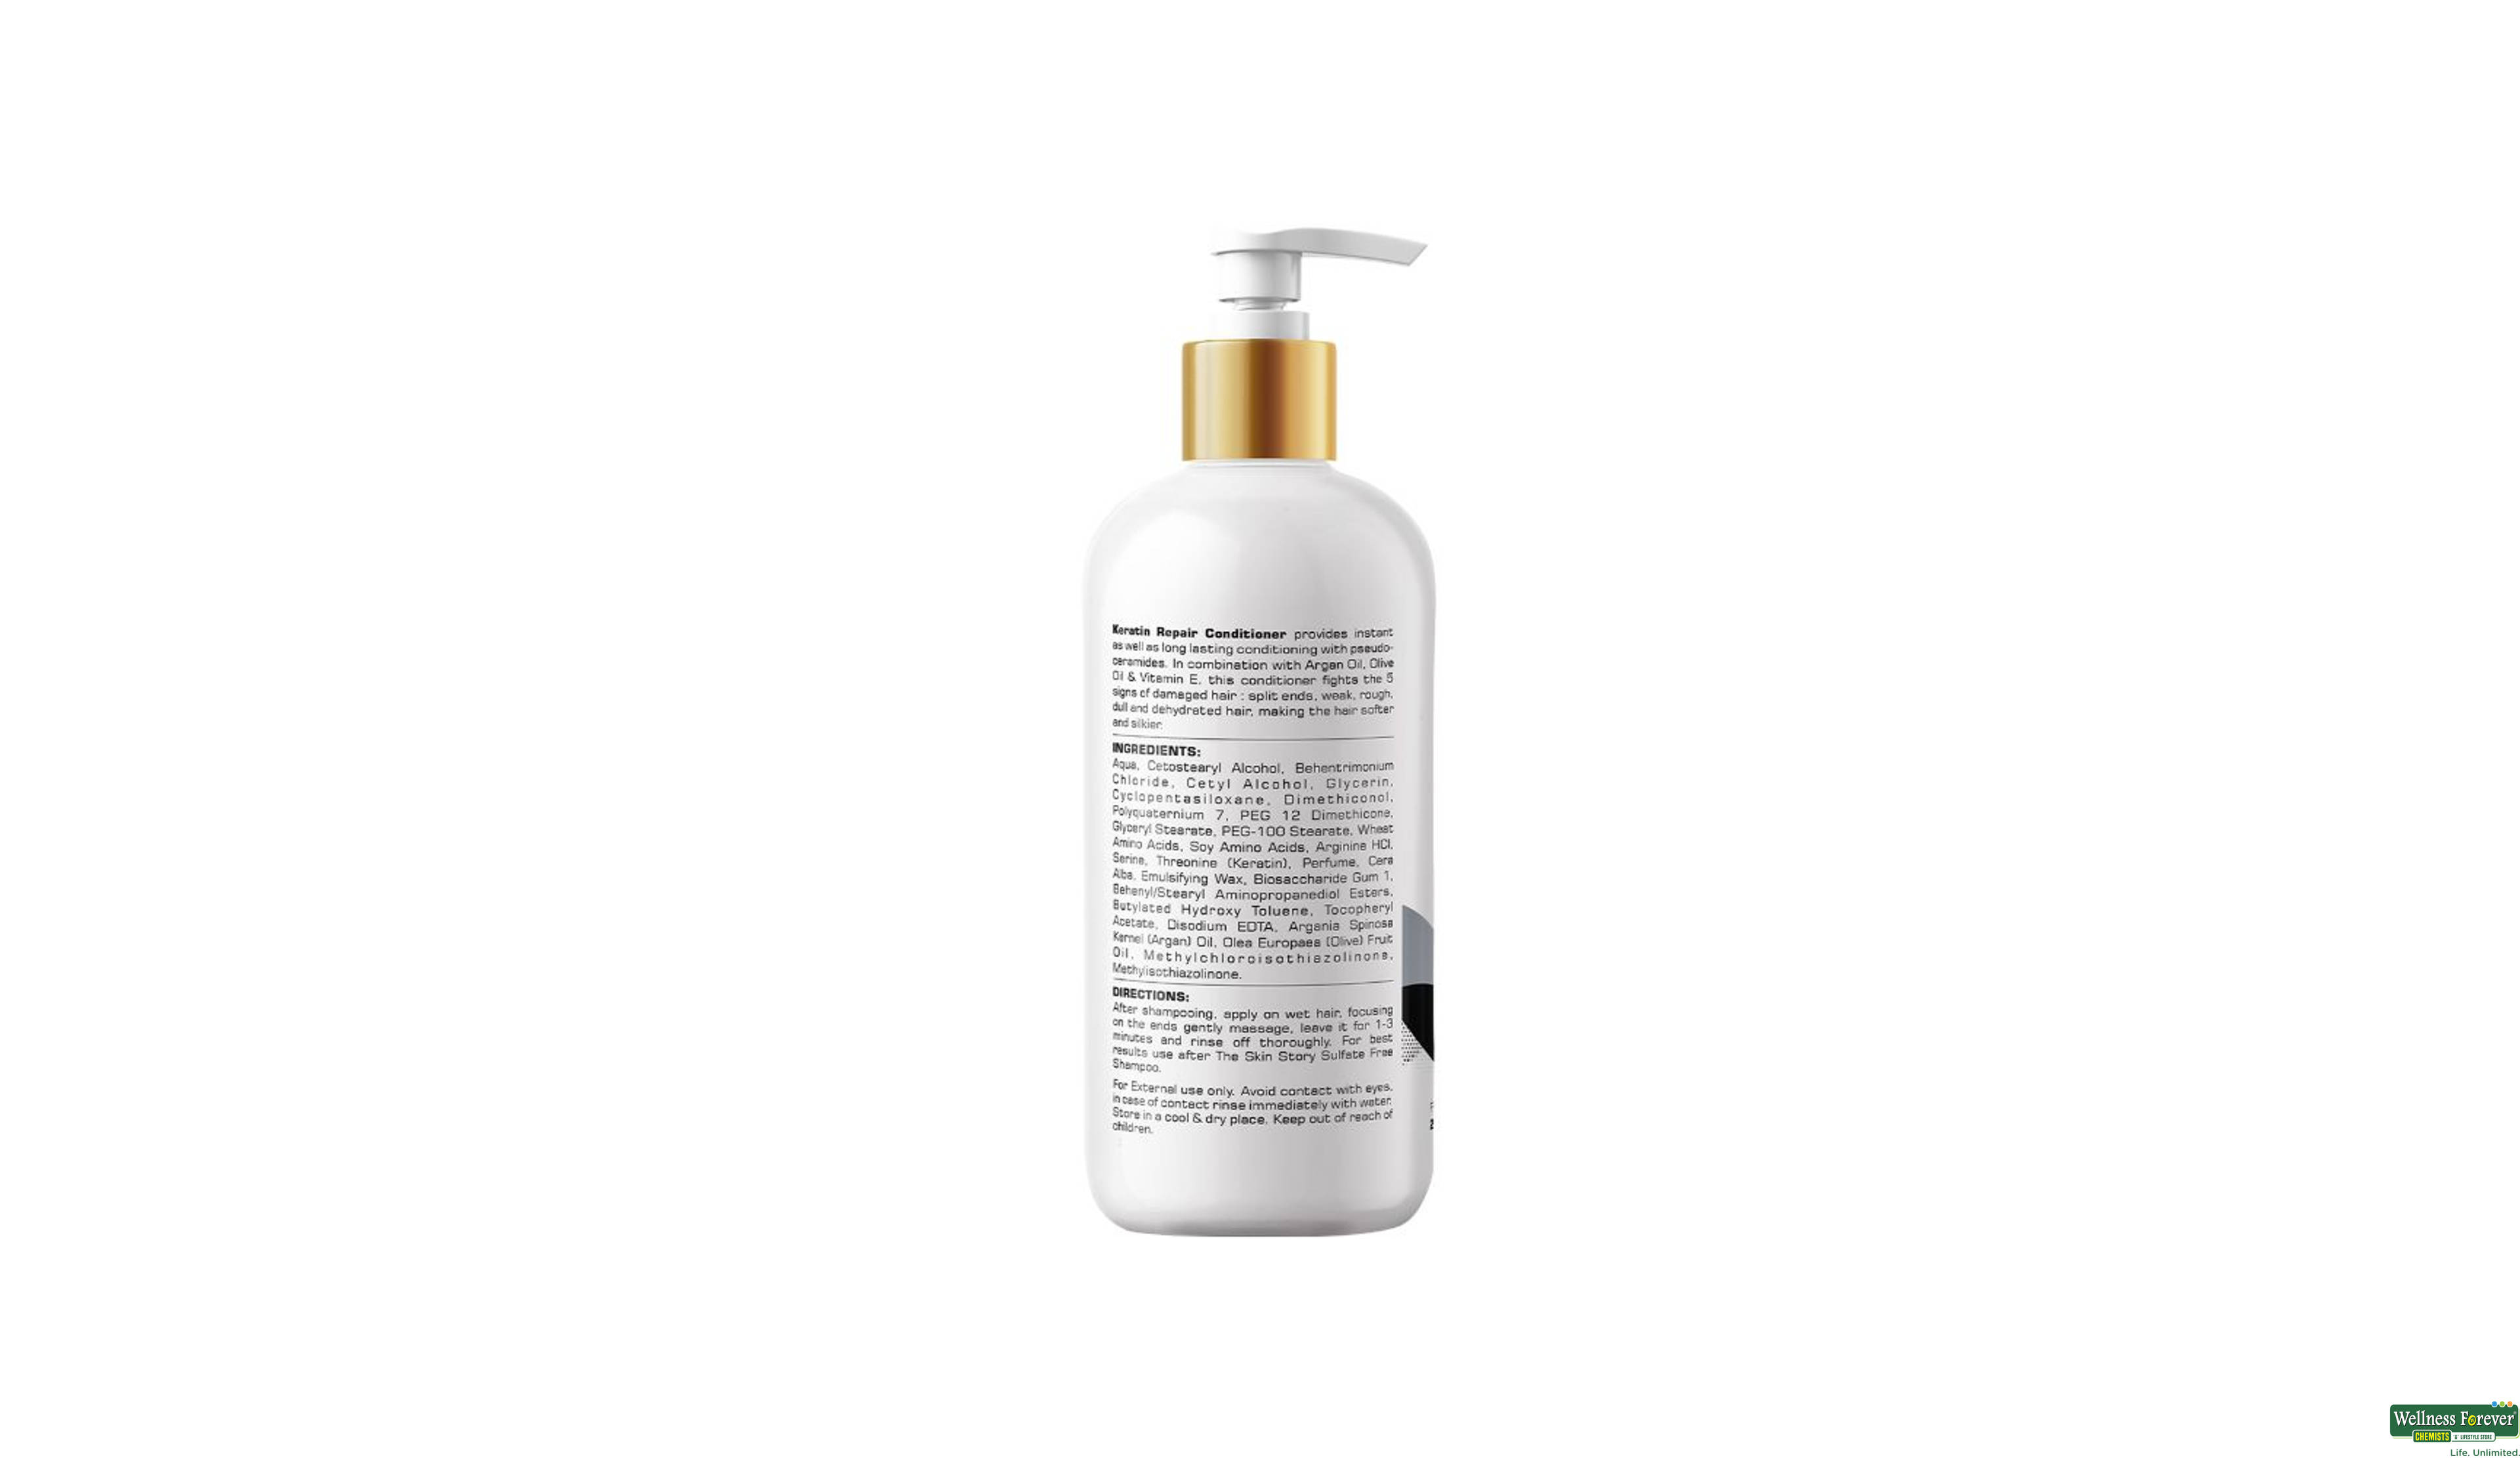 THE SKIN STORY KERATIN CONDITIONER FOR DAMAGMED HAIR 250GM- 4, 250ML, 